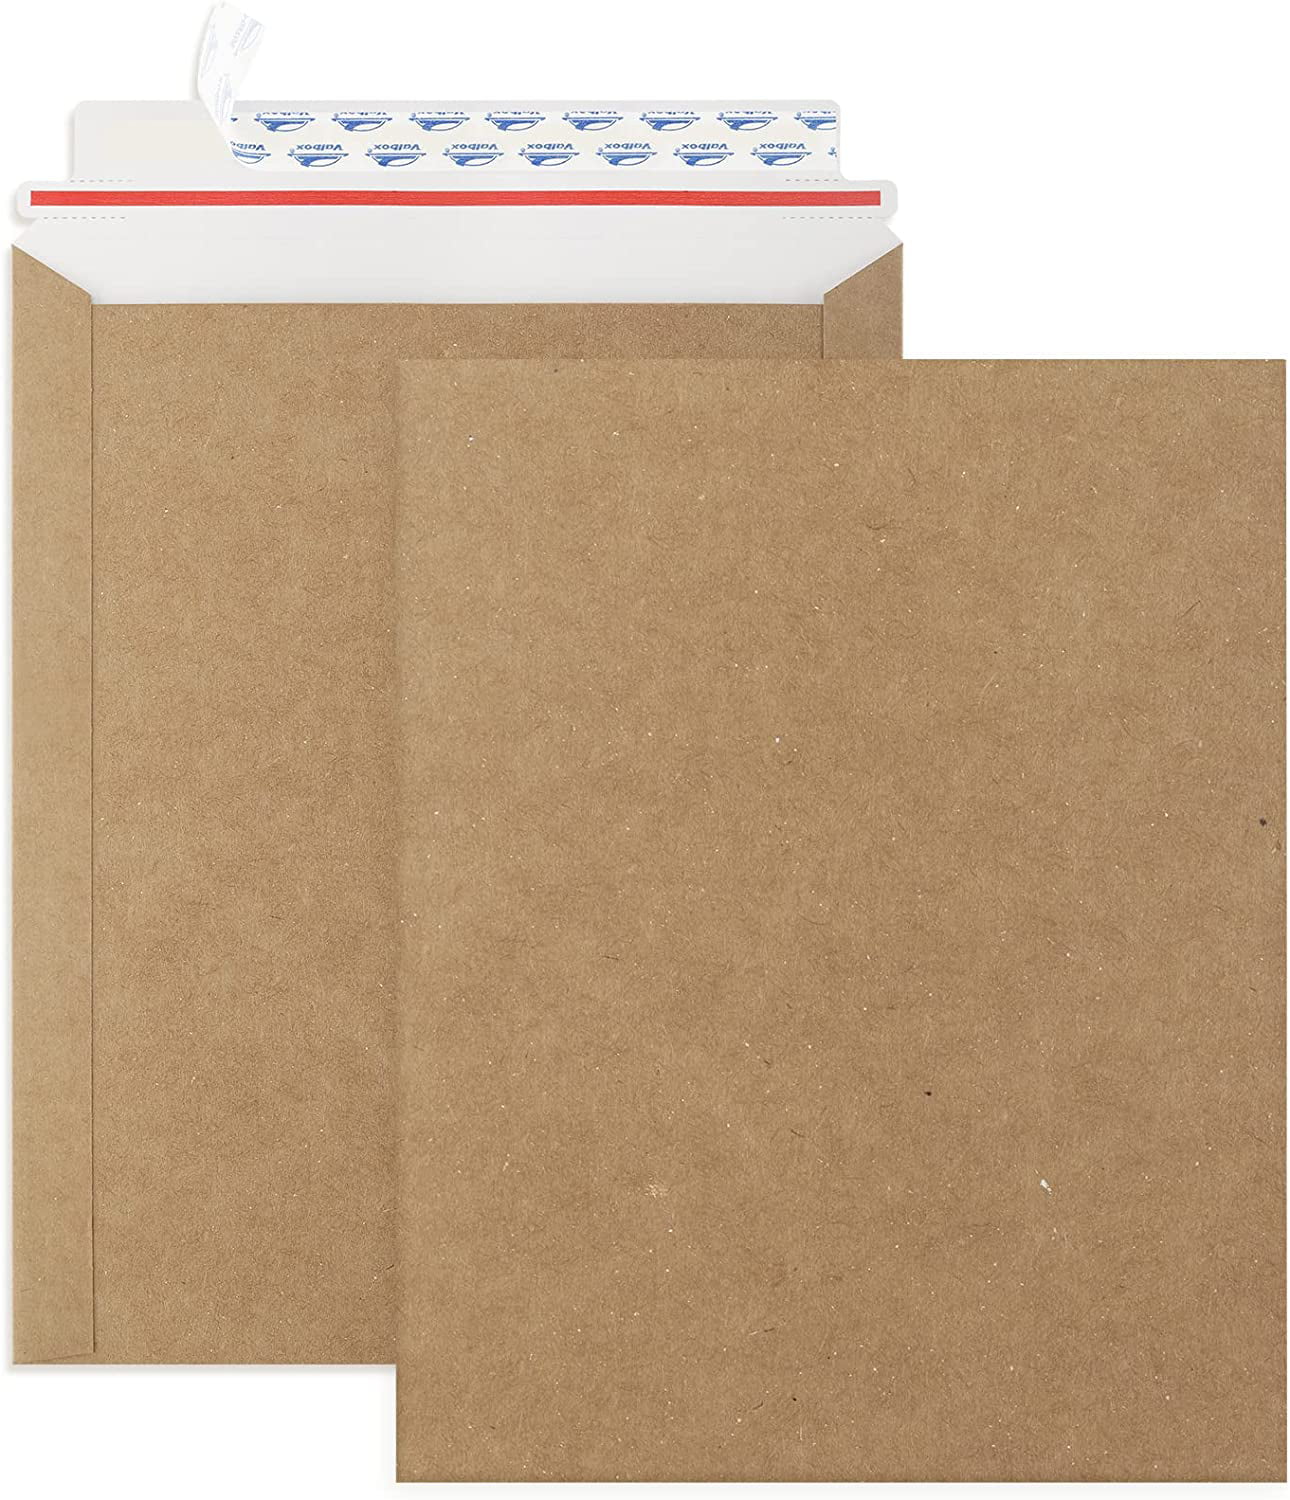 75-9x11.5 "EcoSwift" Brand Self Seal Shipping Photo Cardboard Envelope Mailers 